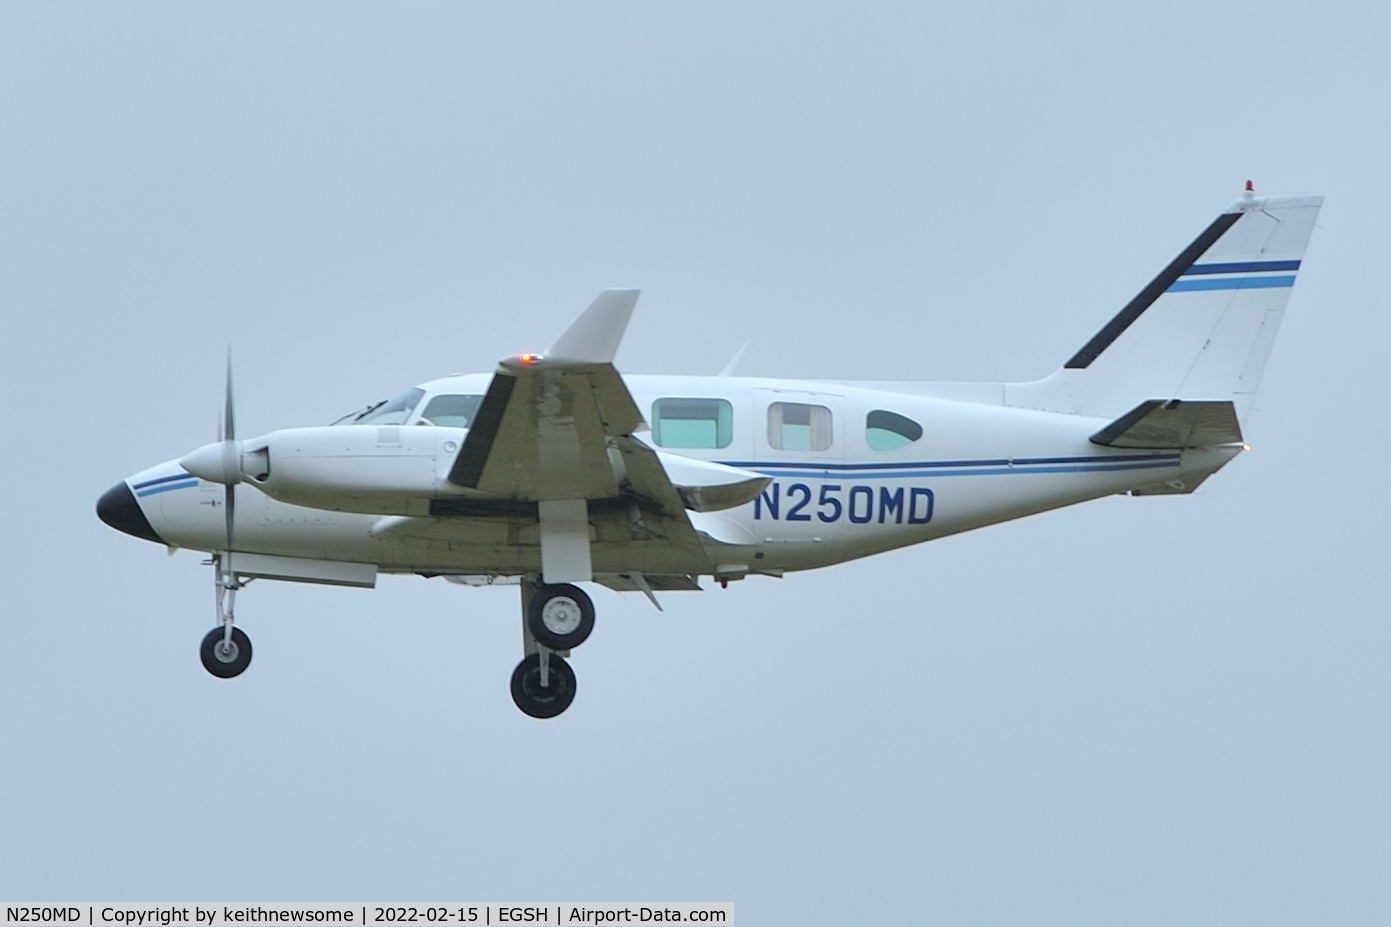 N250MD, 1971 Piper PA-31 Navajo C/N 31-742, Arriving at Norwich from Newcastle.